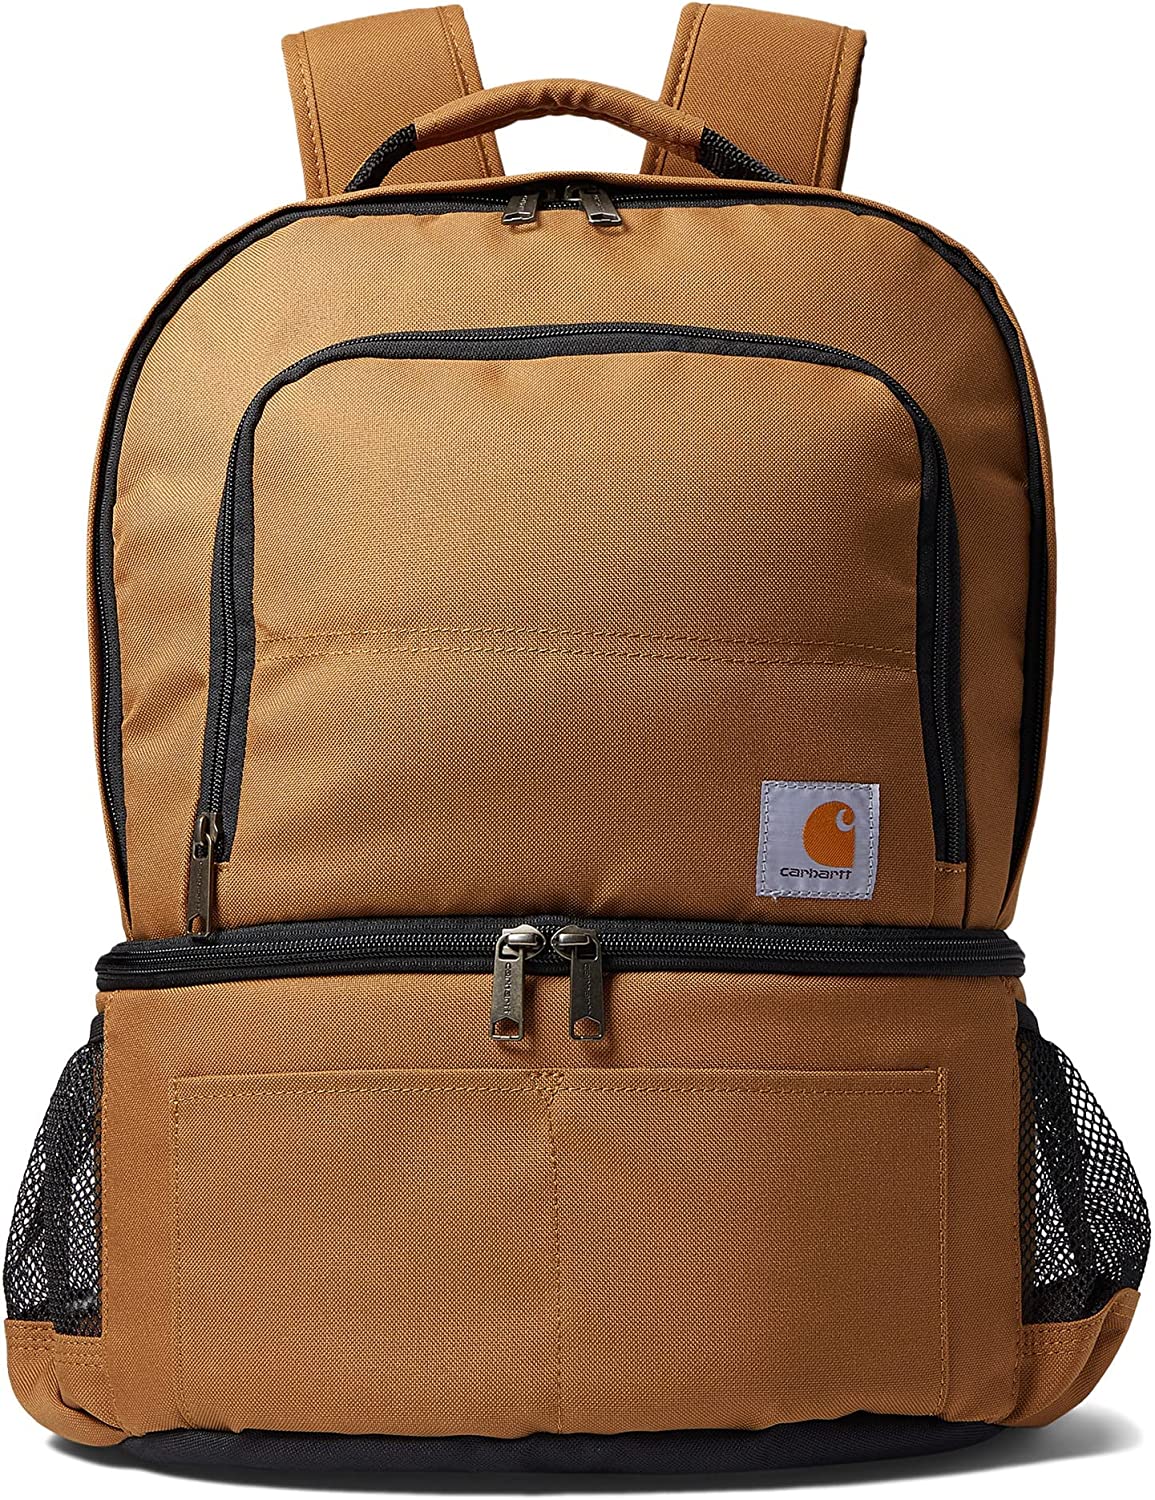 Carhartt Insulated Two Compartment Cooler Backpack